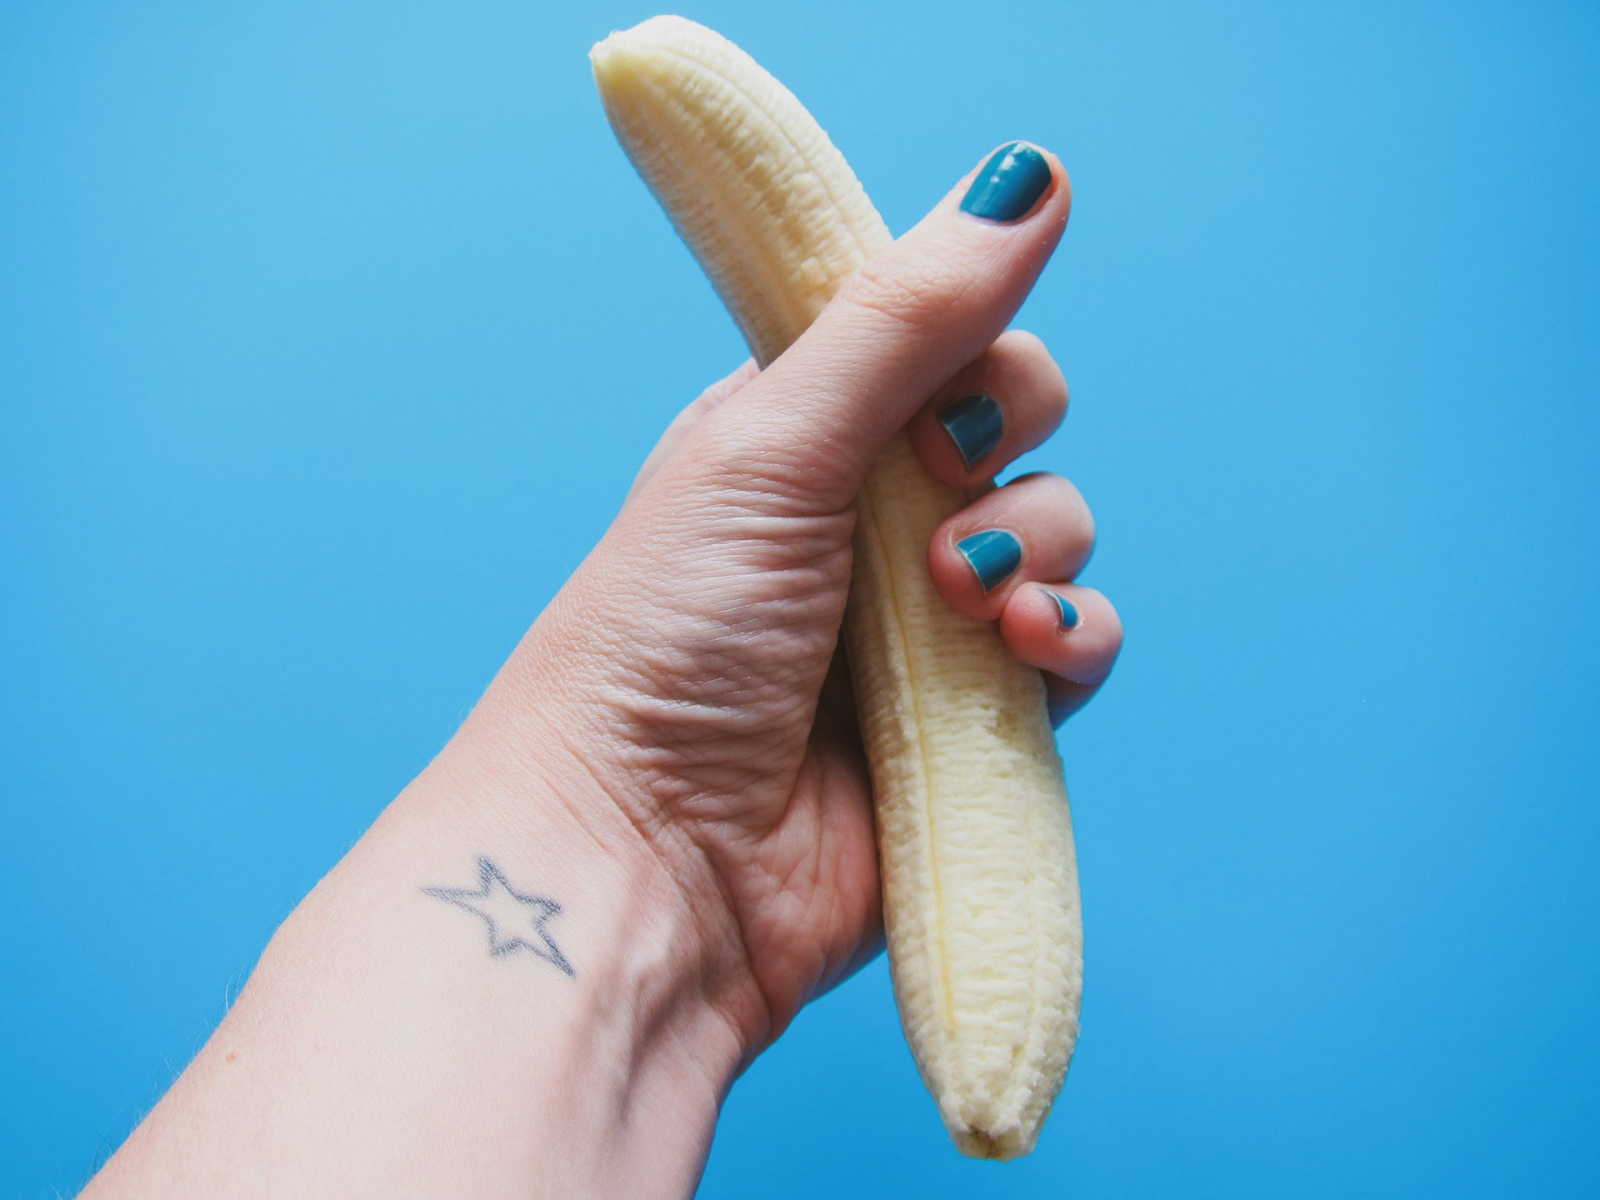 A banana representing a penis being gently squeezed, solving premature ejaculation - https://unsplash.com/photos/person-holding-peeled-banana-fruit-WlB1xhXAYOc